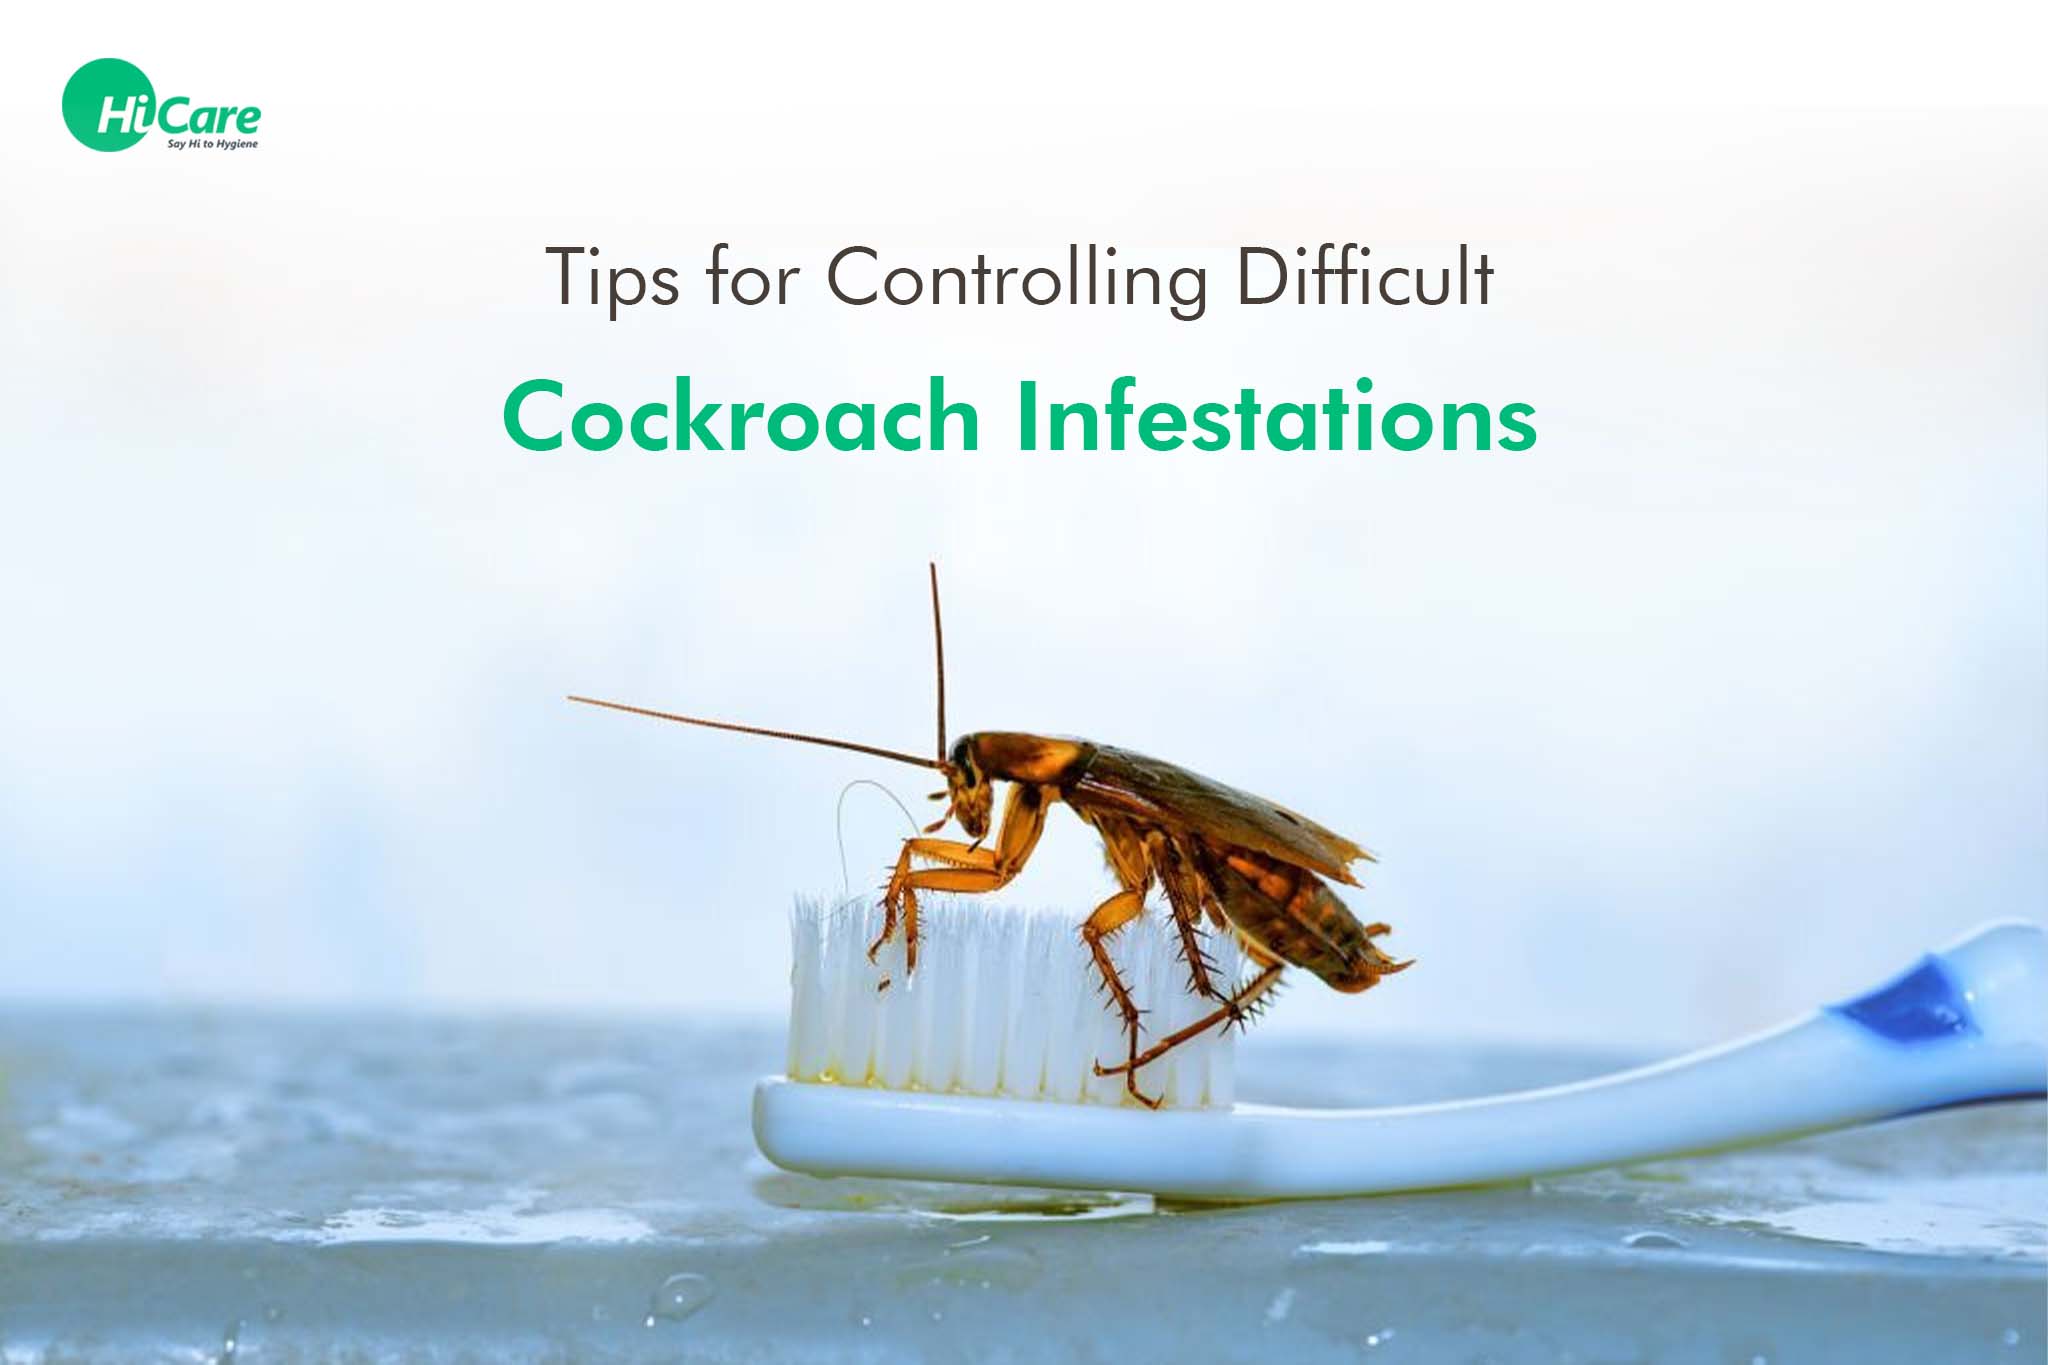 7 Tips for Controlling Difficult Cockroach Infestations